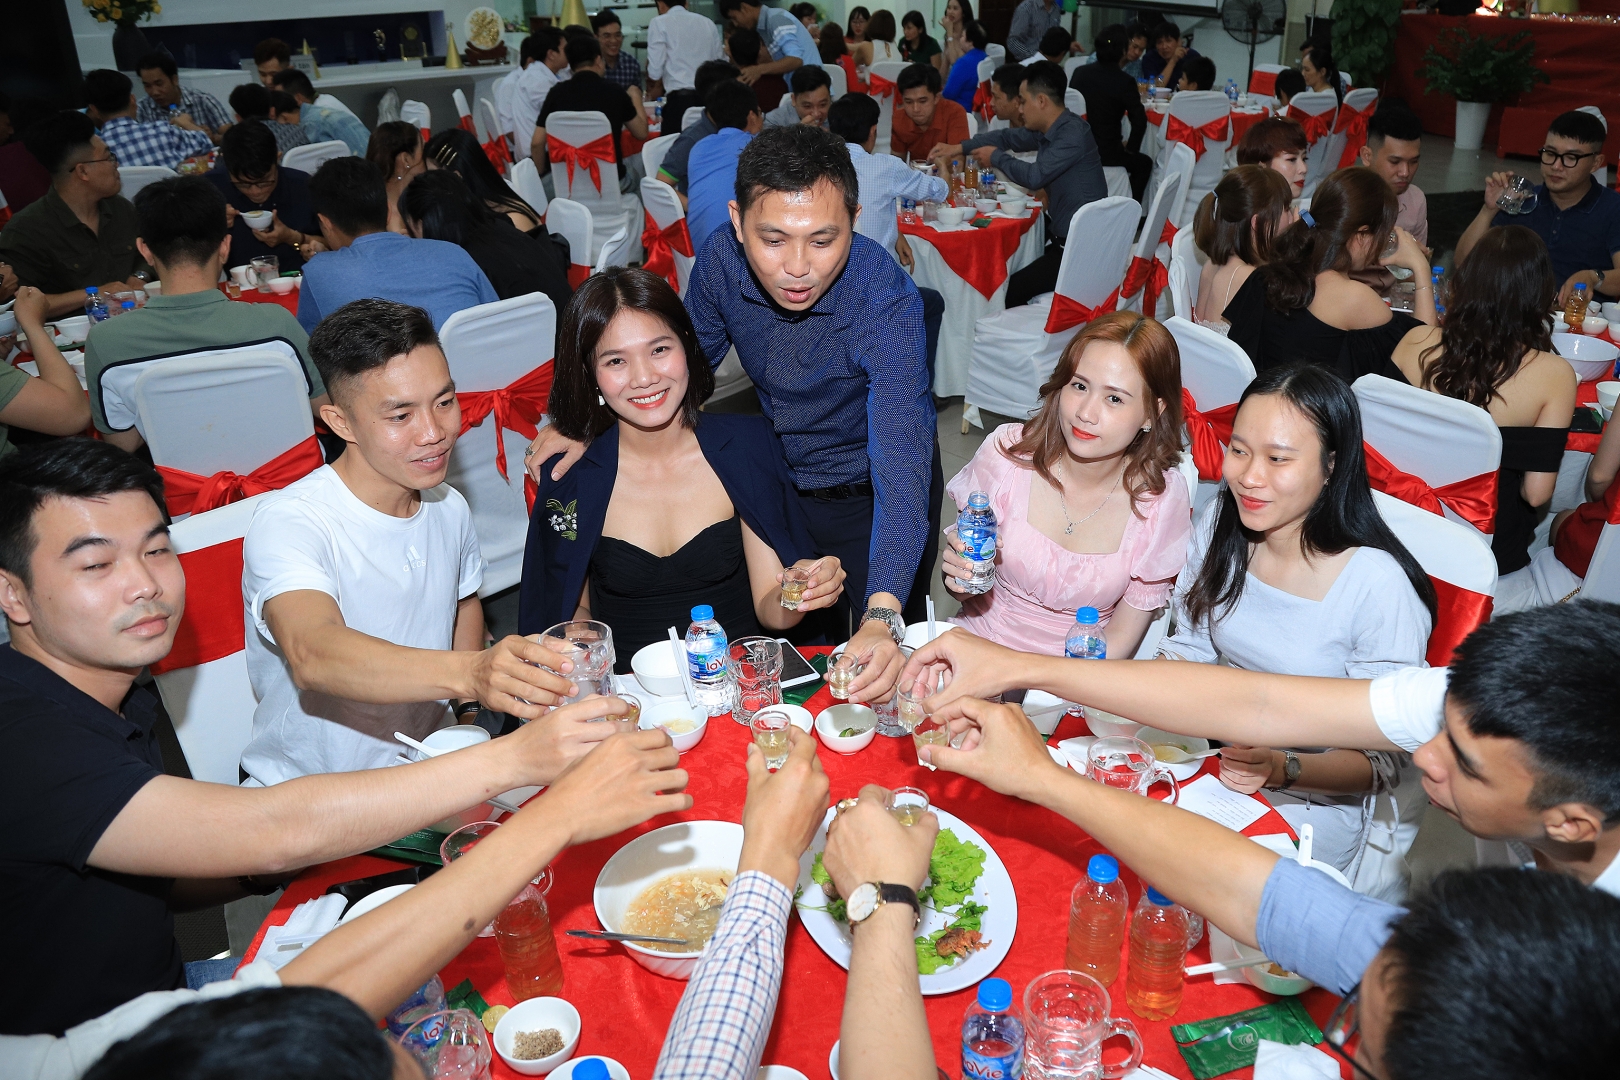 YEAR END PARTY NGUYEN QUANG COMPANY